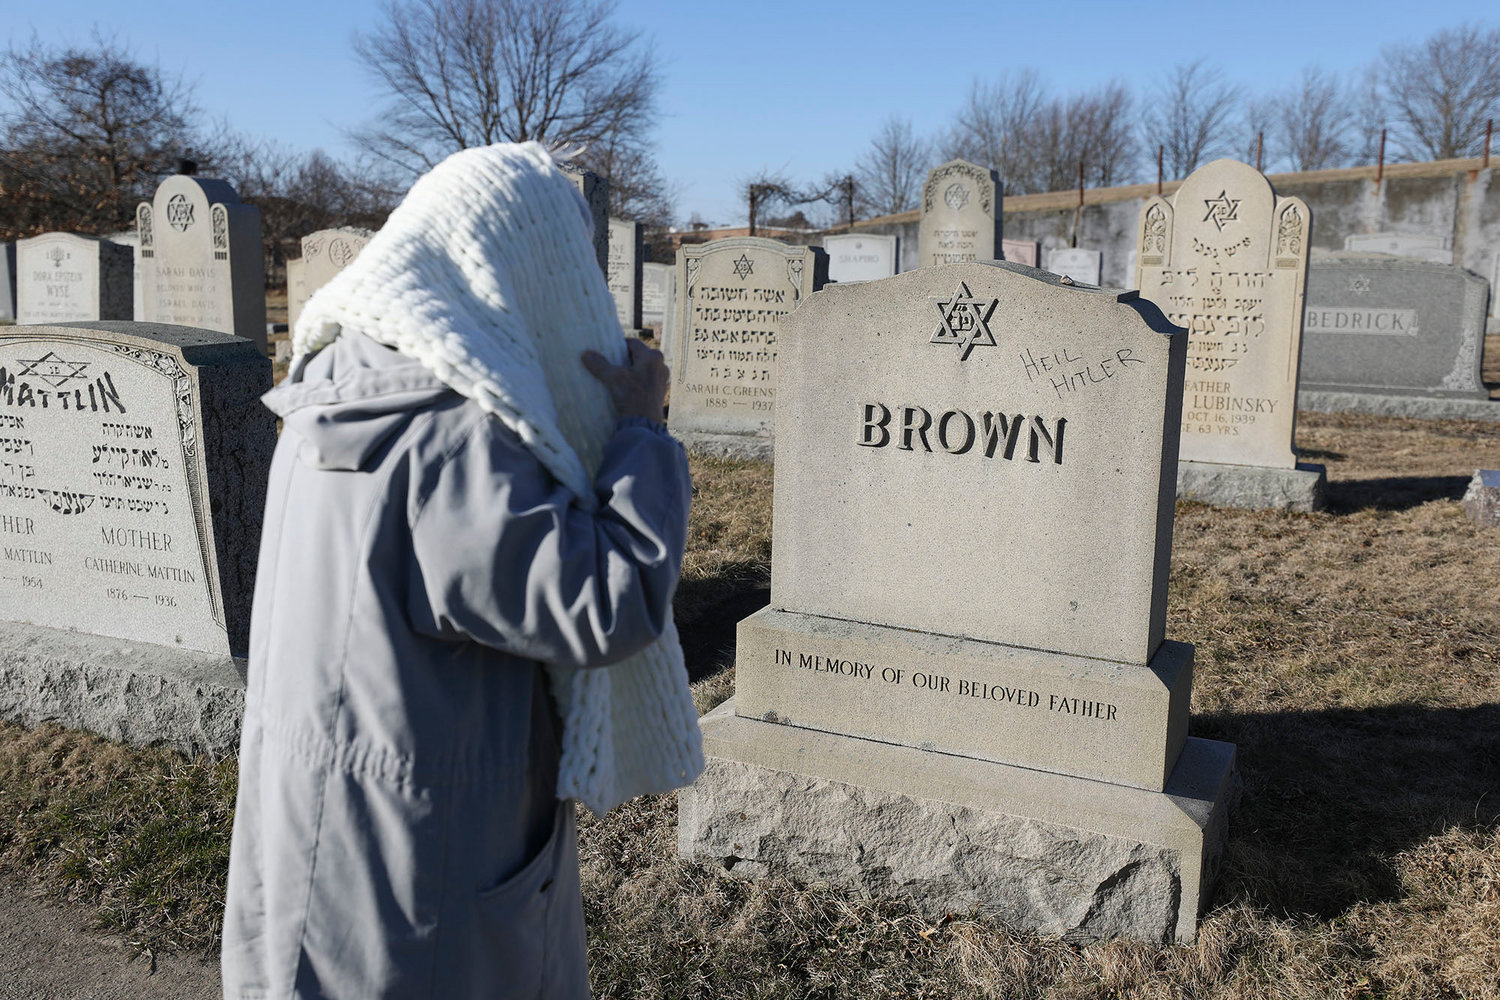 A woman stops to look at a vandalized  grave stone in the cemetery.